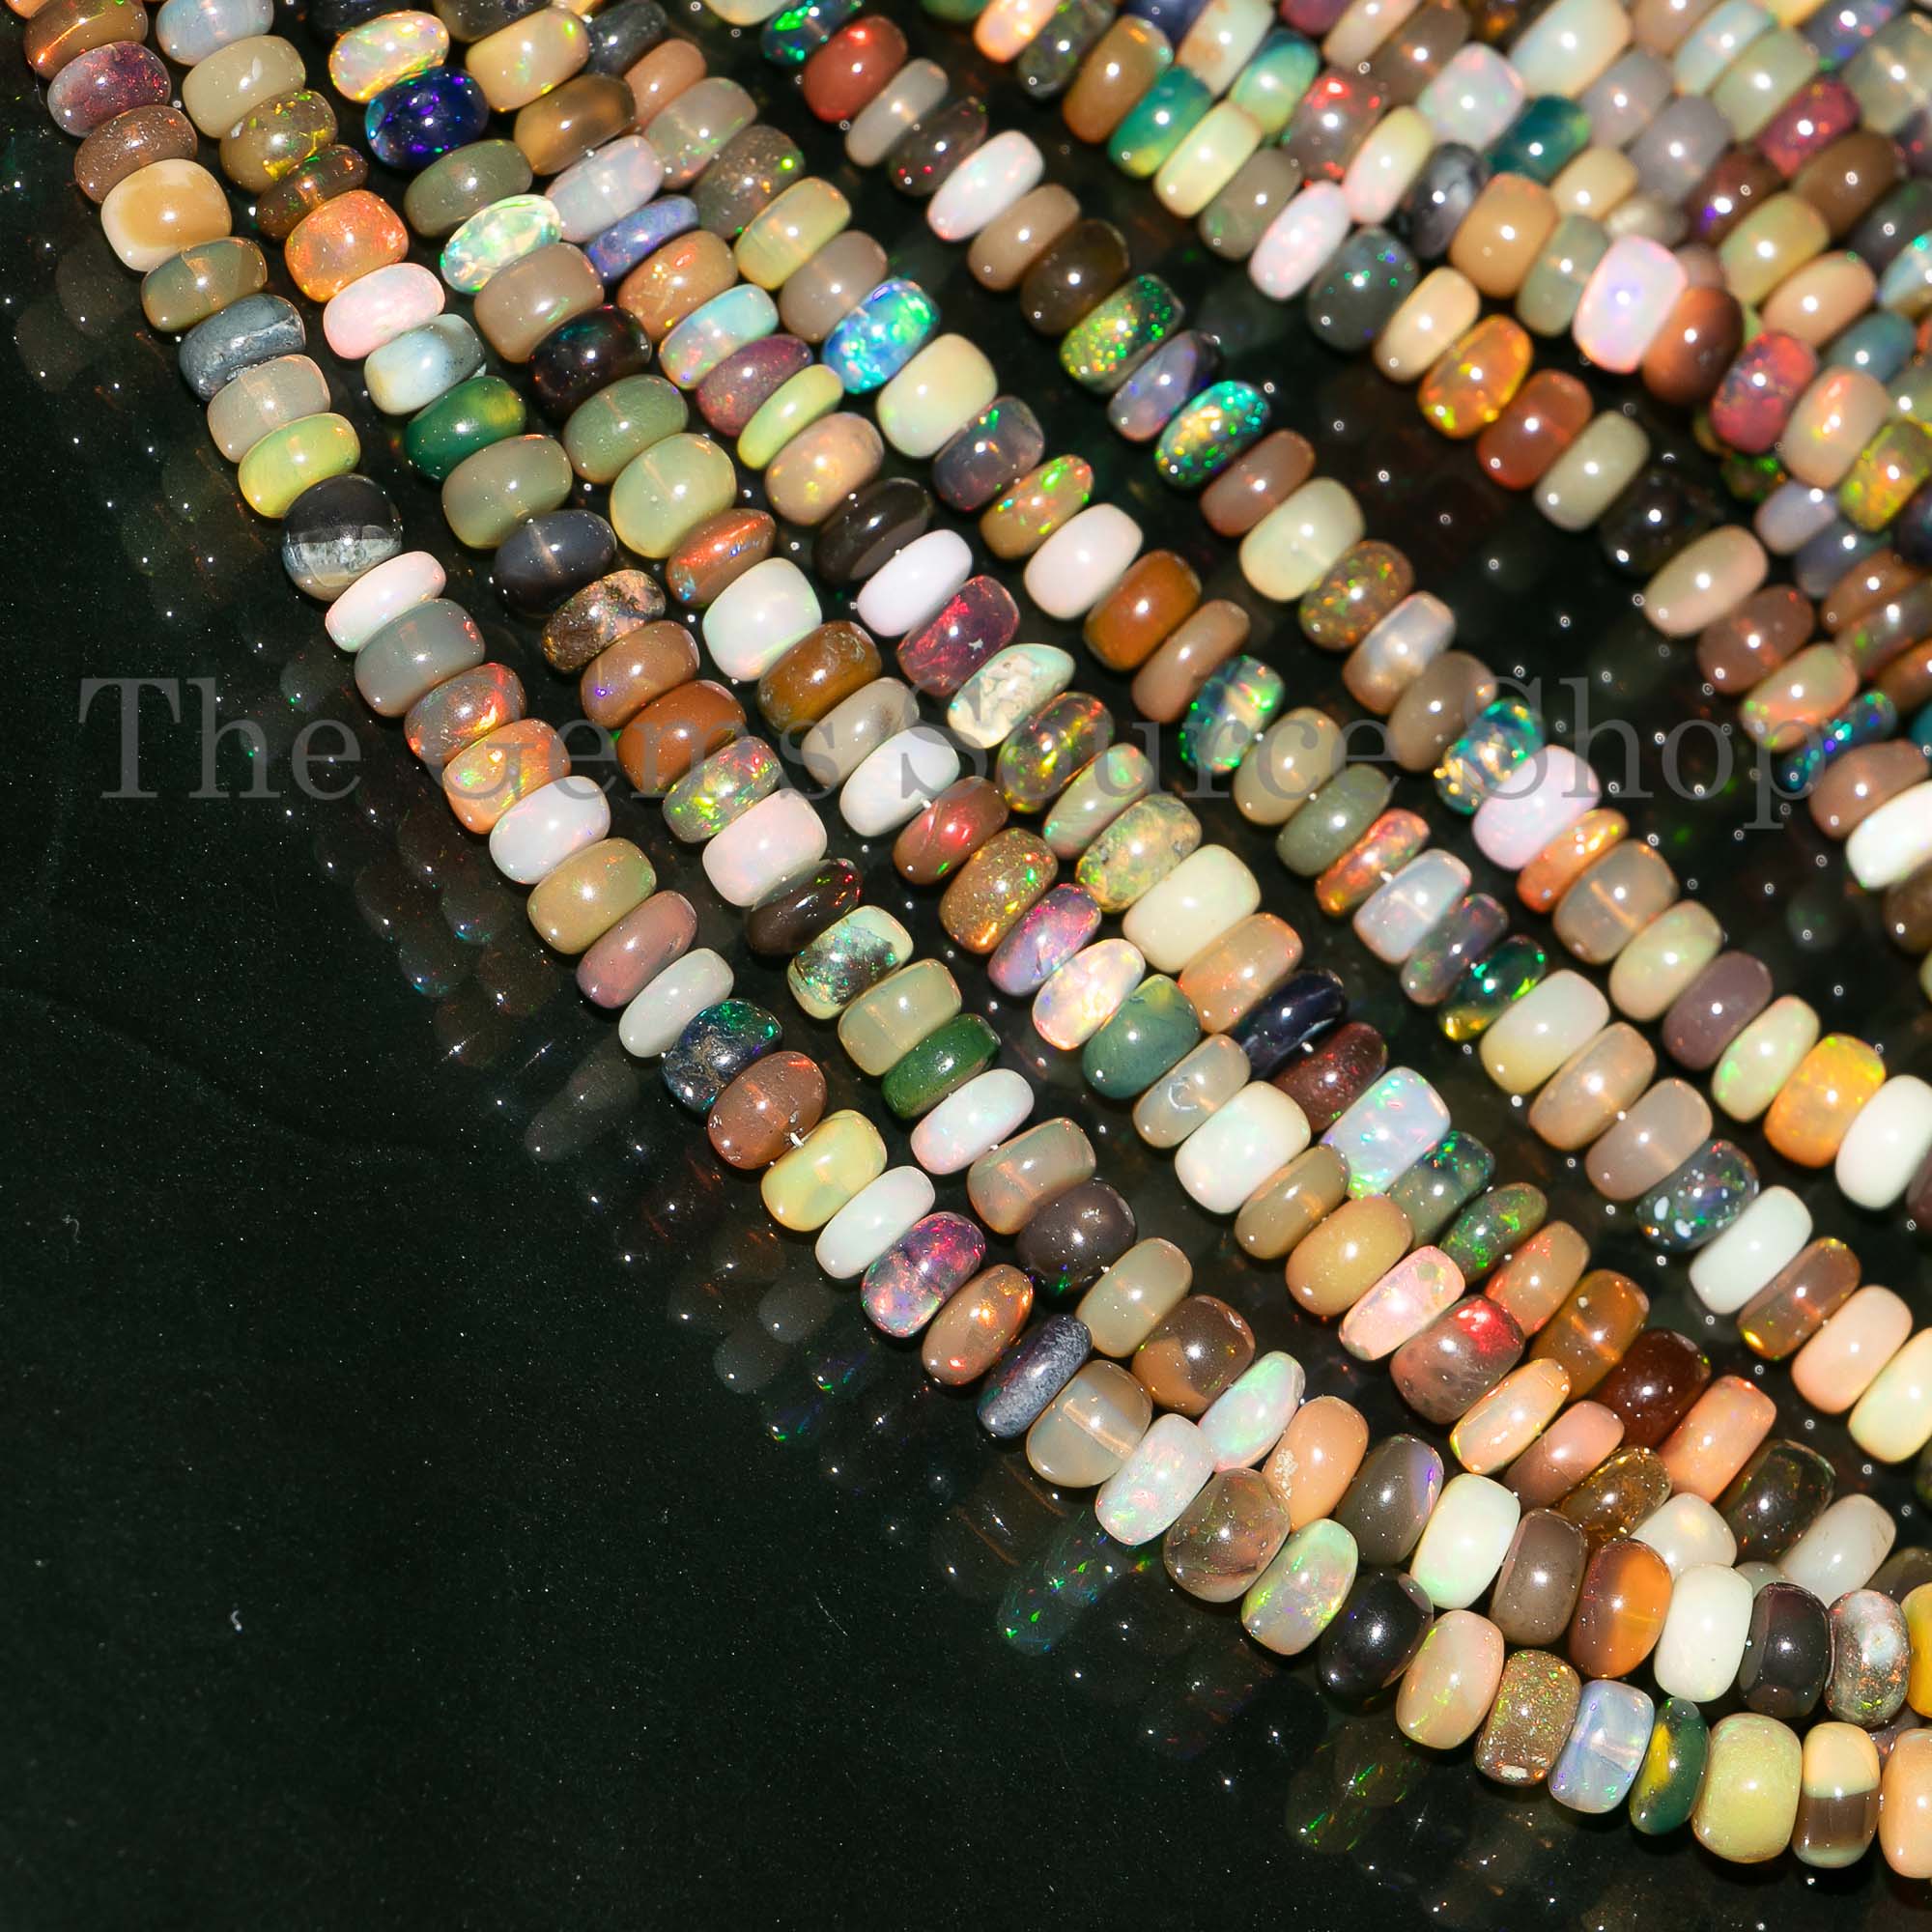 Disco Opal Smooth Rondelle, 6-8mm Disco Opal Plain Beads, Disco Opal Beads, Opal Smooth Rondelle, Opal Rondelle Beads